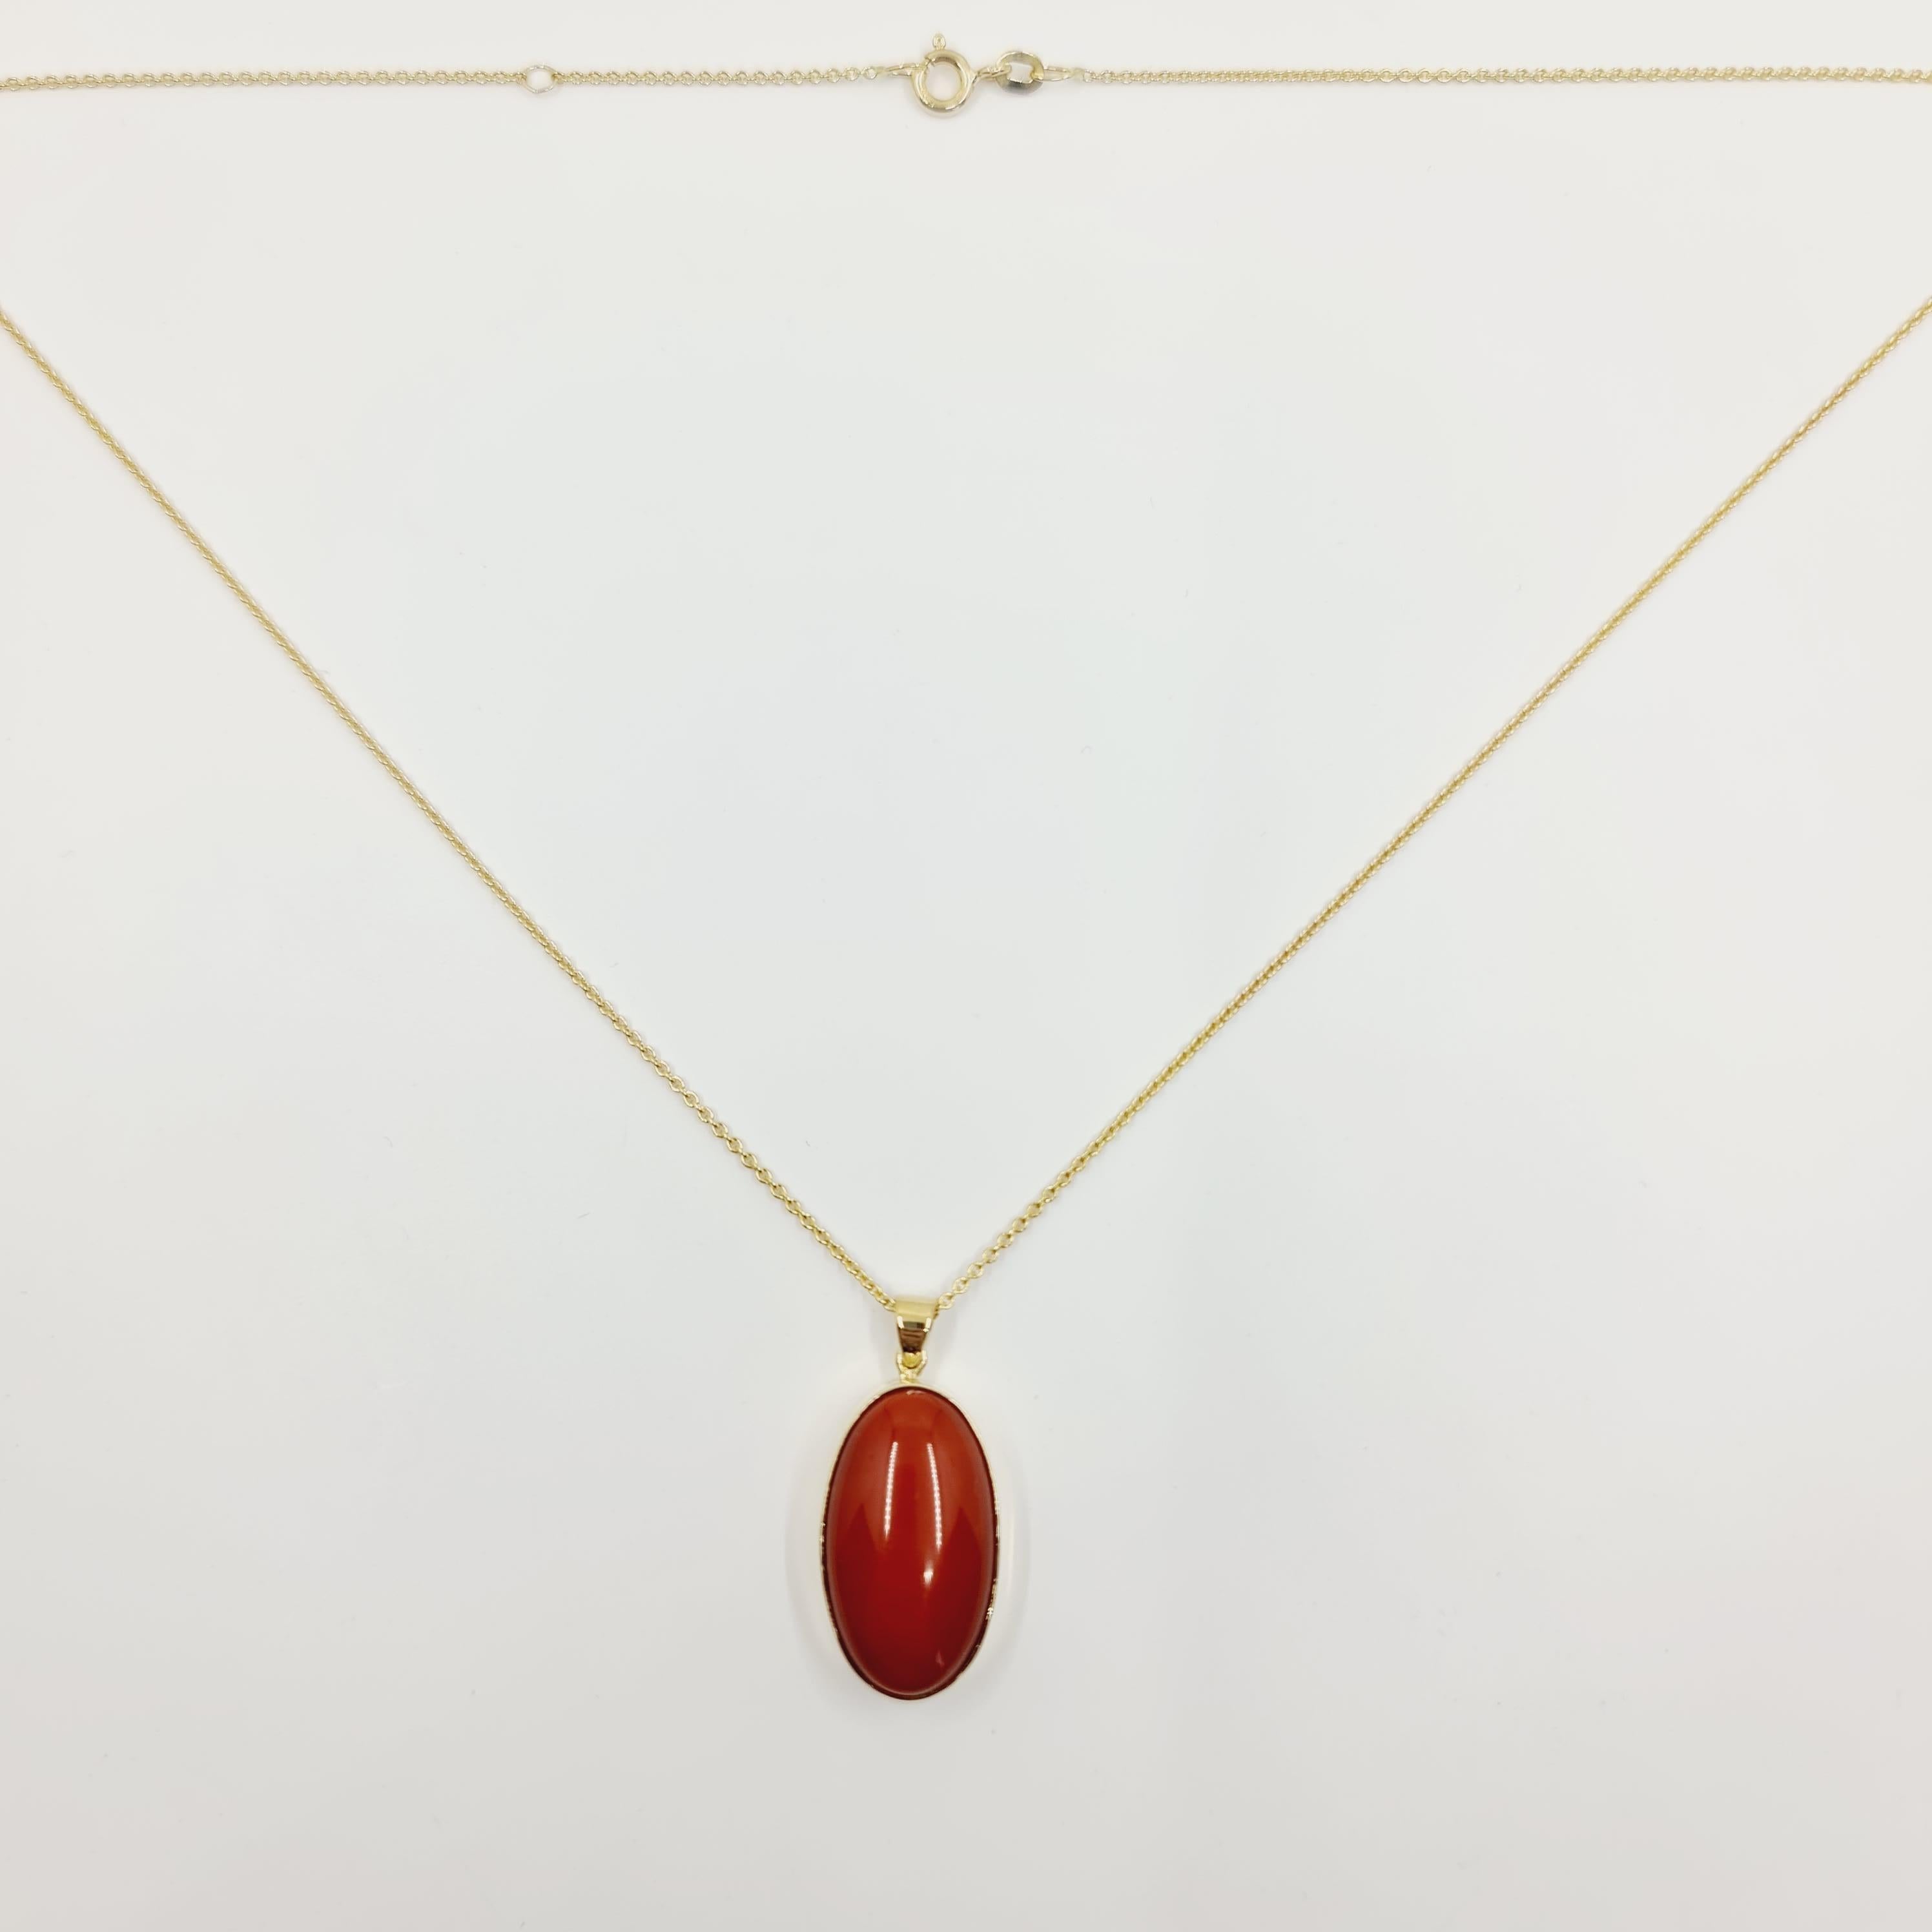 14k Gold Necklace with Oval Cut Natural Coral 13.3 Ct.

Measurements: 2,2x1,8x0,9cm
Chain: 42cm
Coral: 13.3 Carat

Feel free to contact us if any questions may arise.

You are looking for other shapes, colors or sizes? 
Contact us with your inquiry,